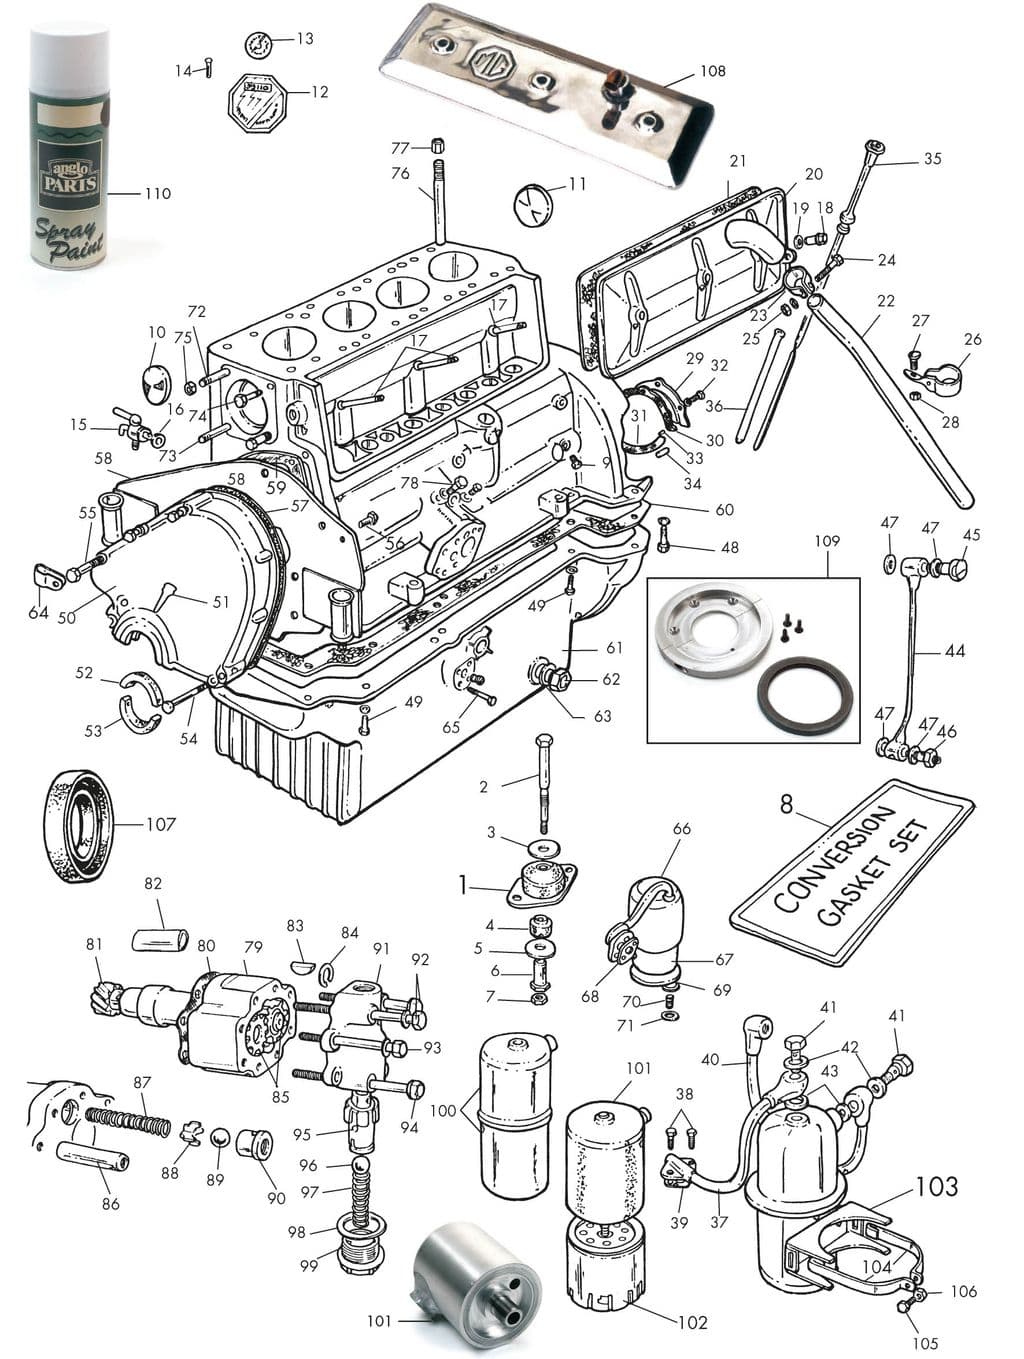 MGTC 1945-1949 - Oil sumps | Webshop Anglo Parts - Engine block & oil system - 1